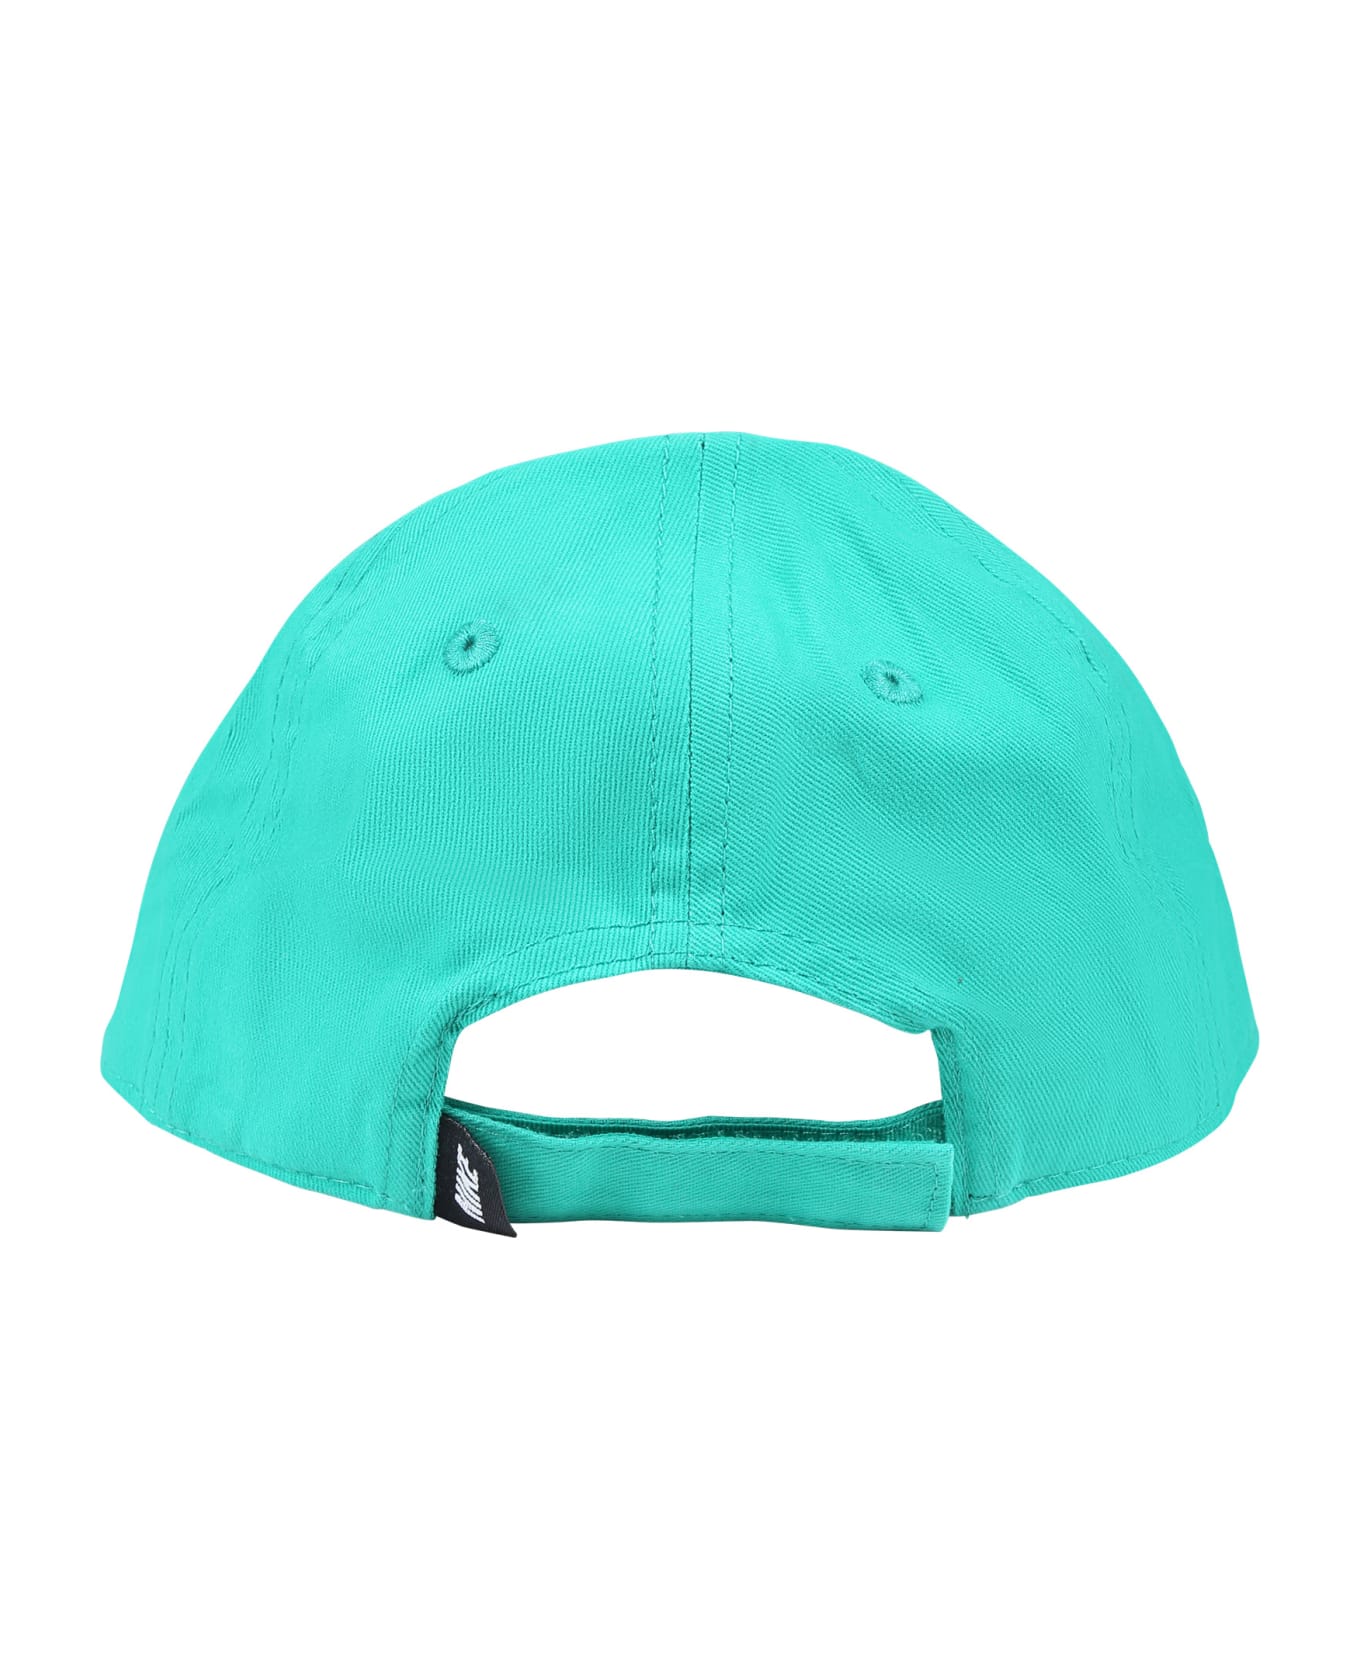 Nike Green Hat With Visor For Kids With The Iconic Swoosh - Green アクセサリー＆ギフト